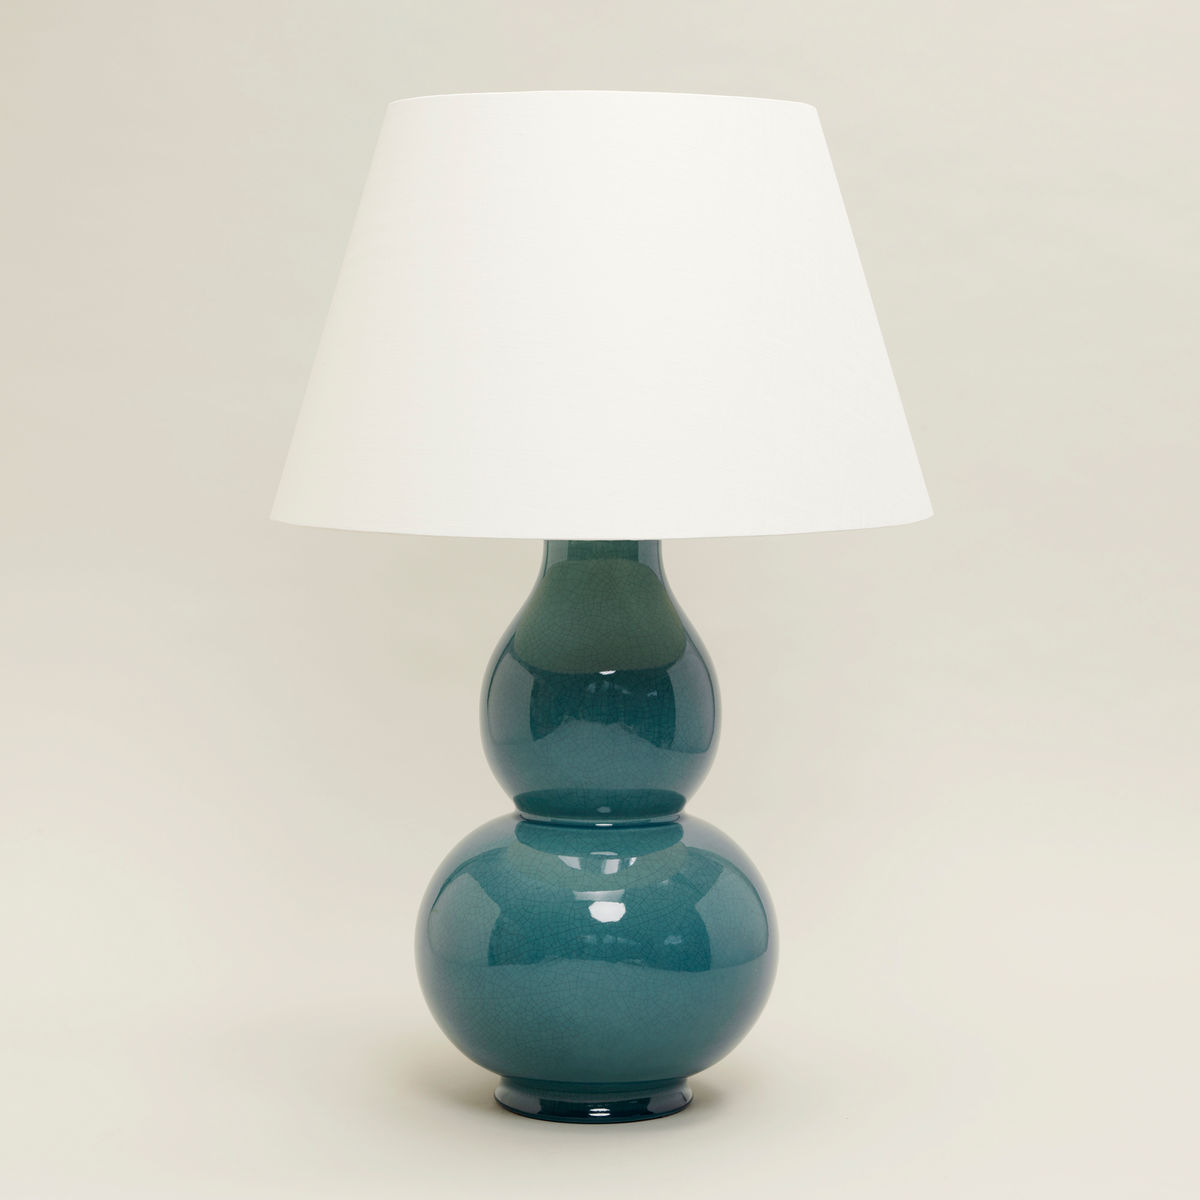 Gourd Shaped Vase Table Lamp in Crackled Teal Green with Linen Laminated Lampshade